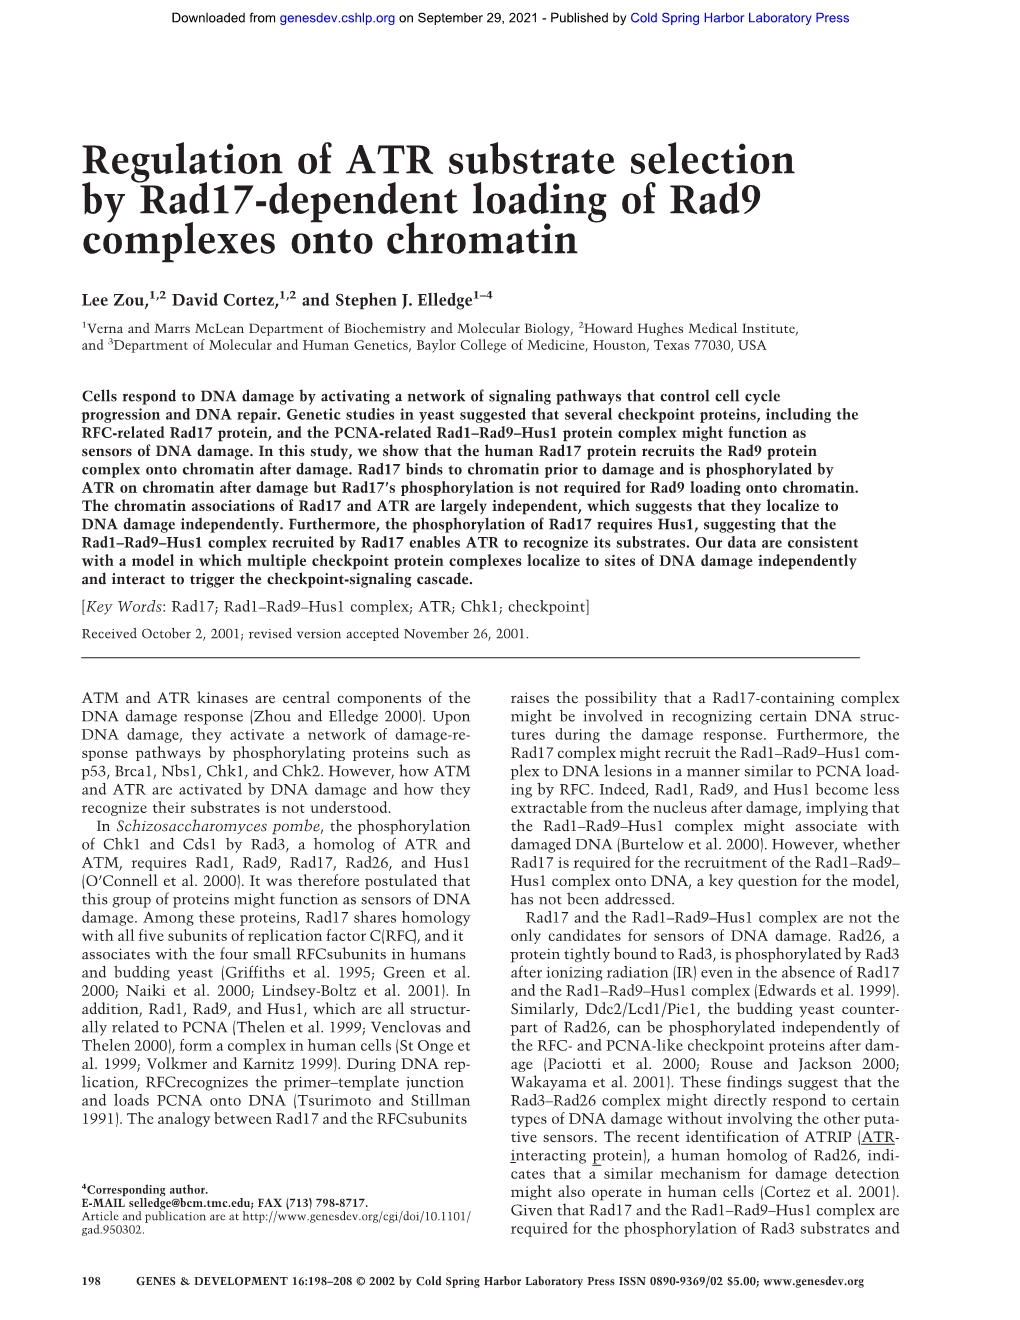 Regulation of ATR Substrate Selection by Rad17-Dependent Loading of Rad9 Complexes Onto Chromatin